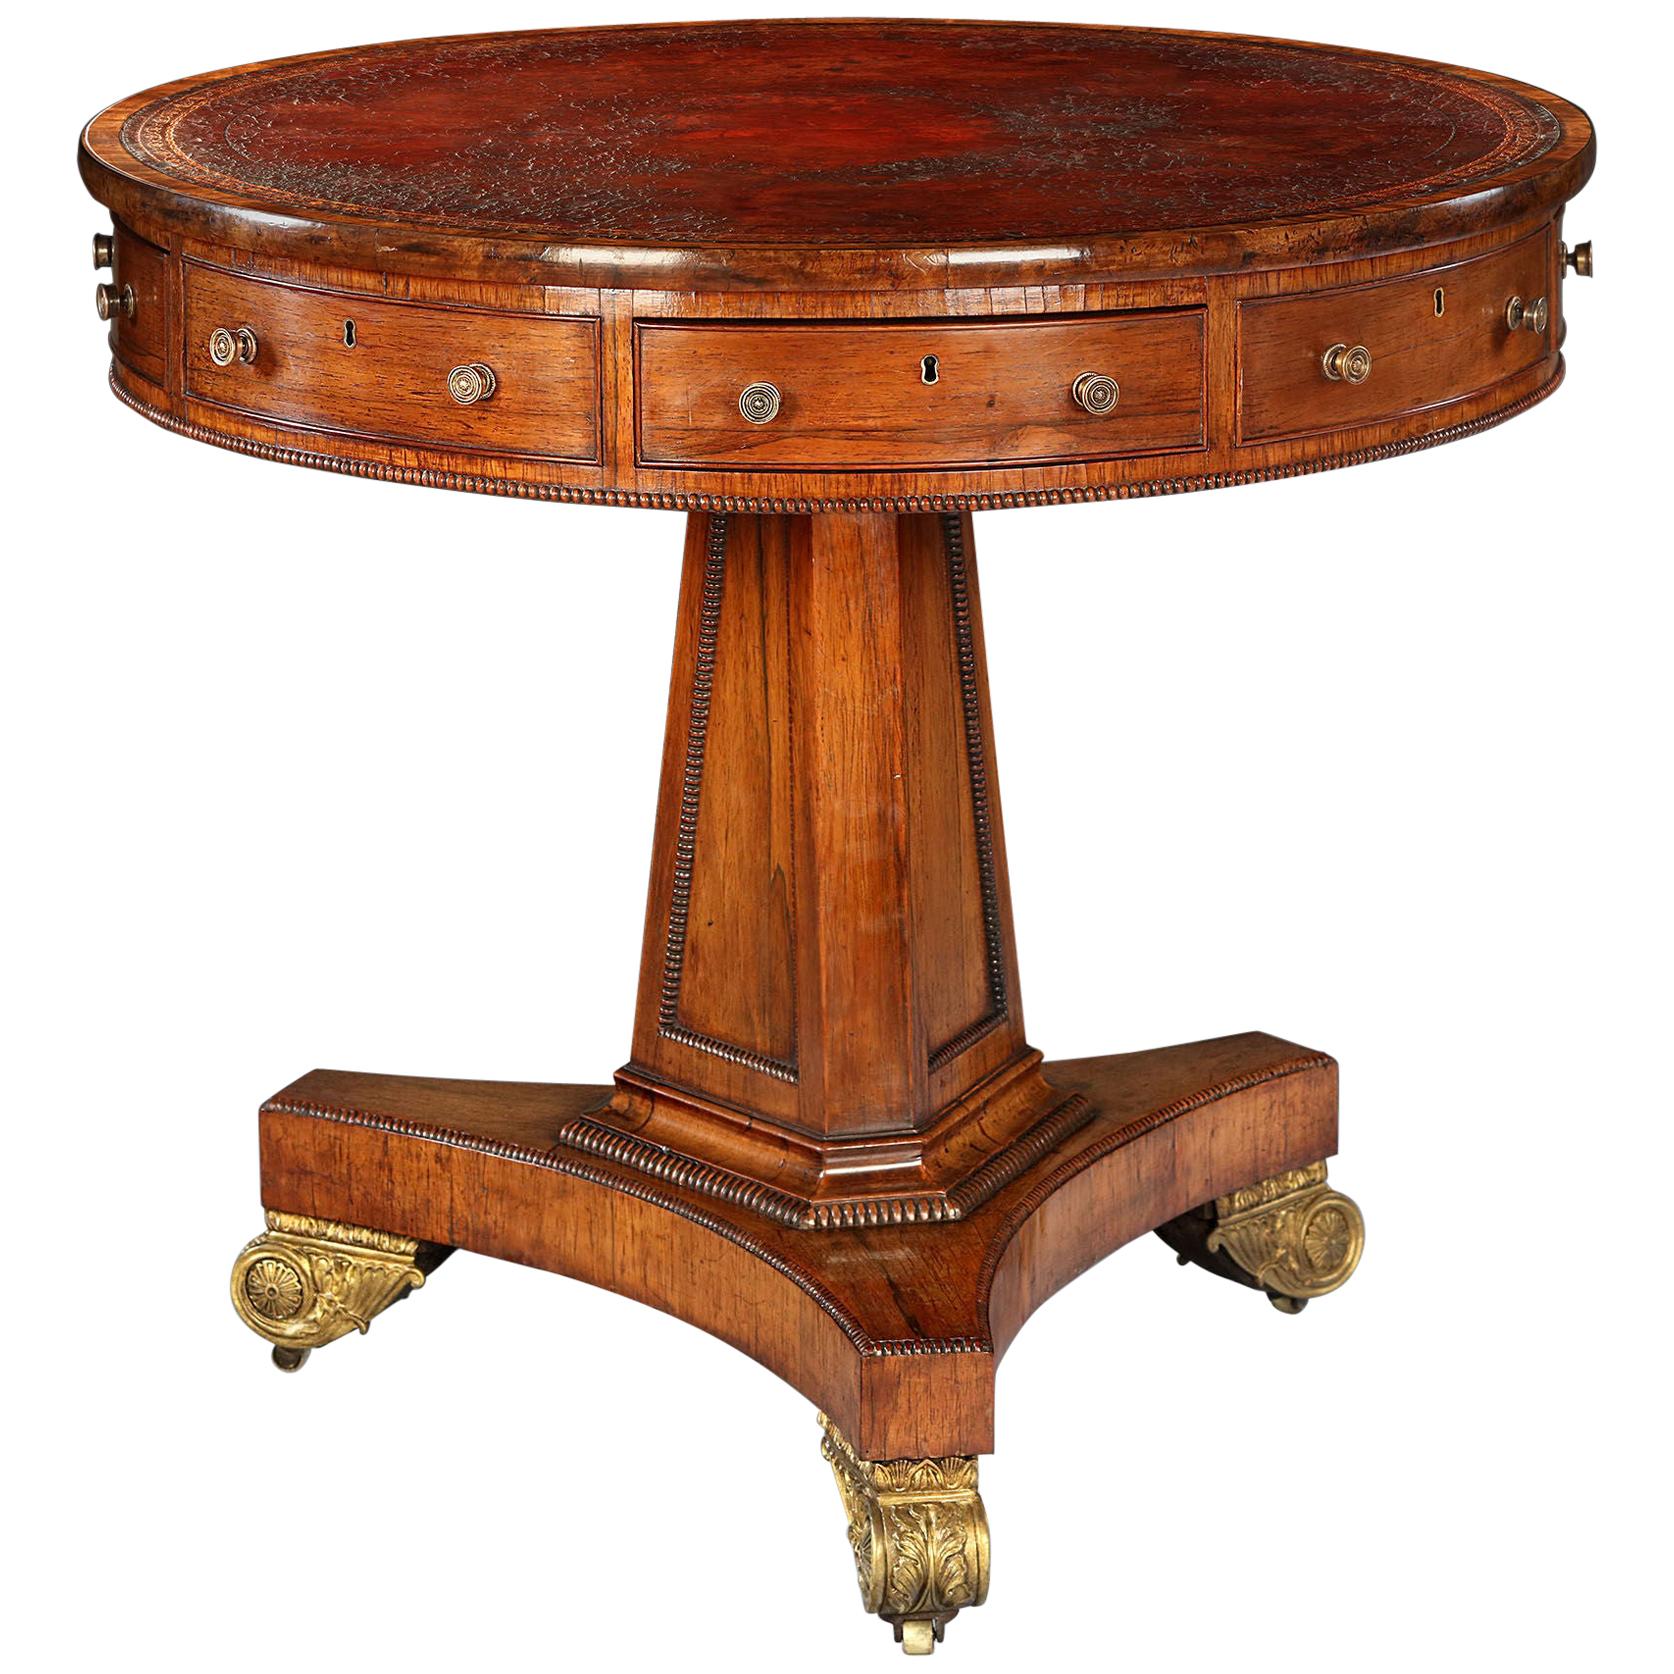 George III Rosewood and Mahogany Drum Table / Centre Table